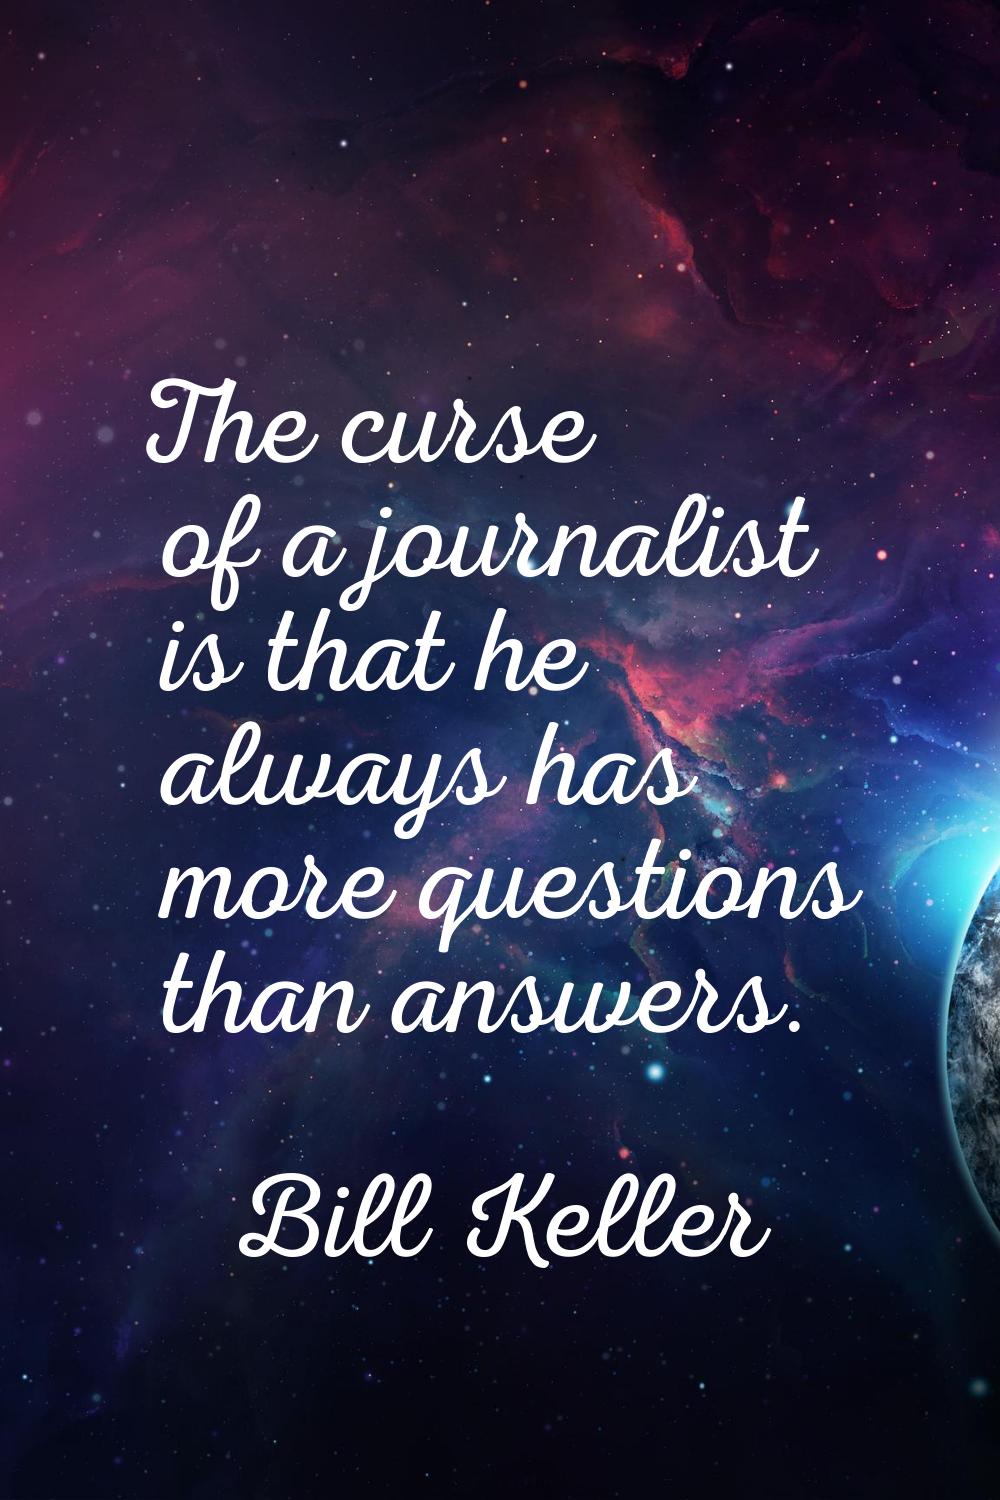 The curse of a journalist is that he always has more questions than answers.